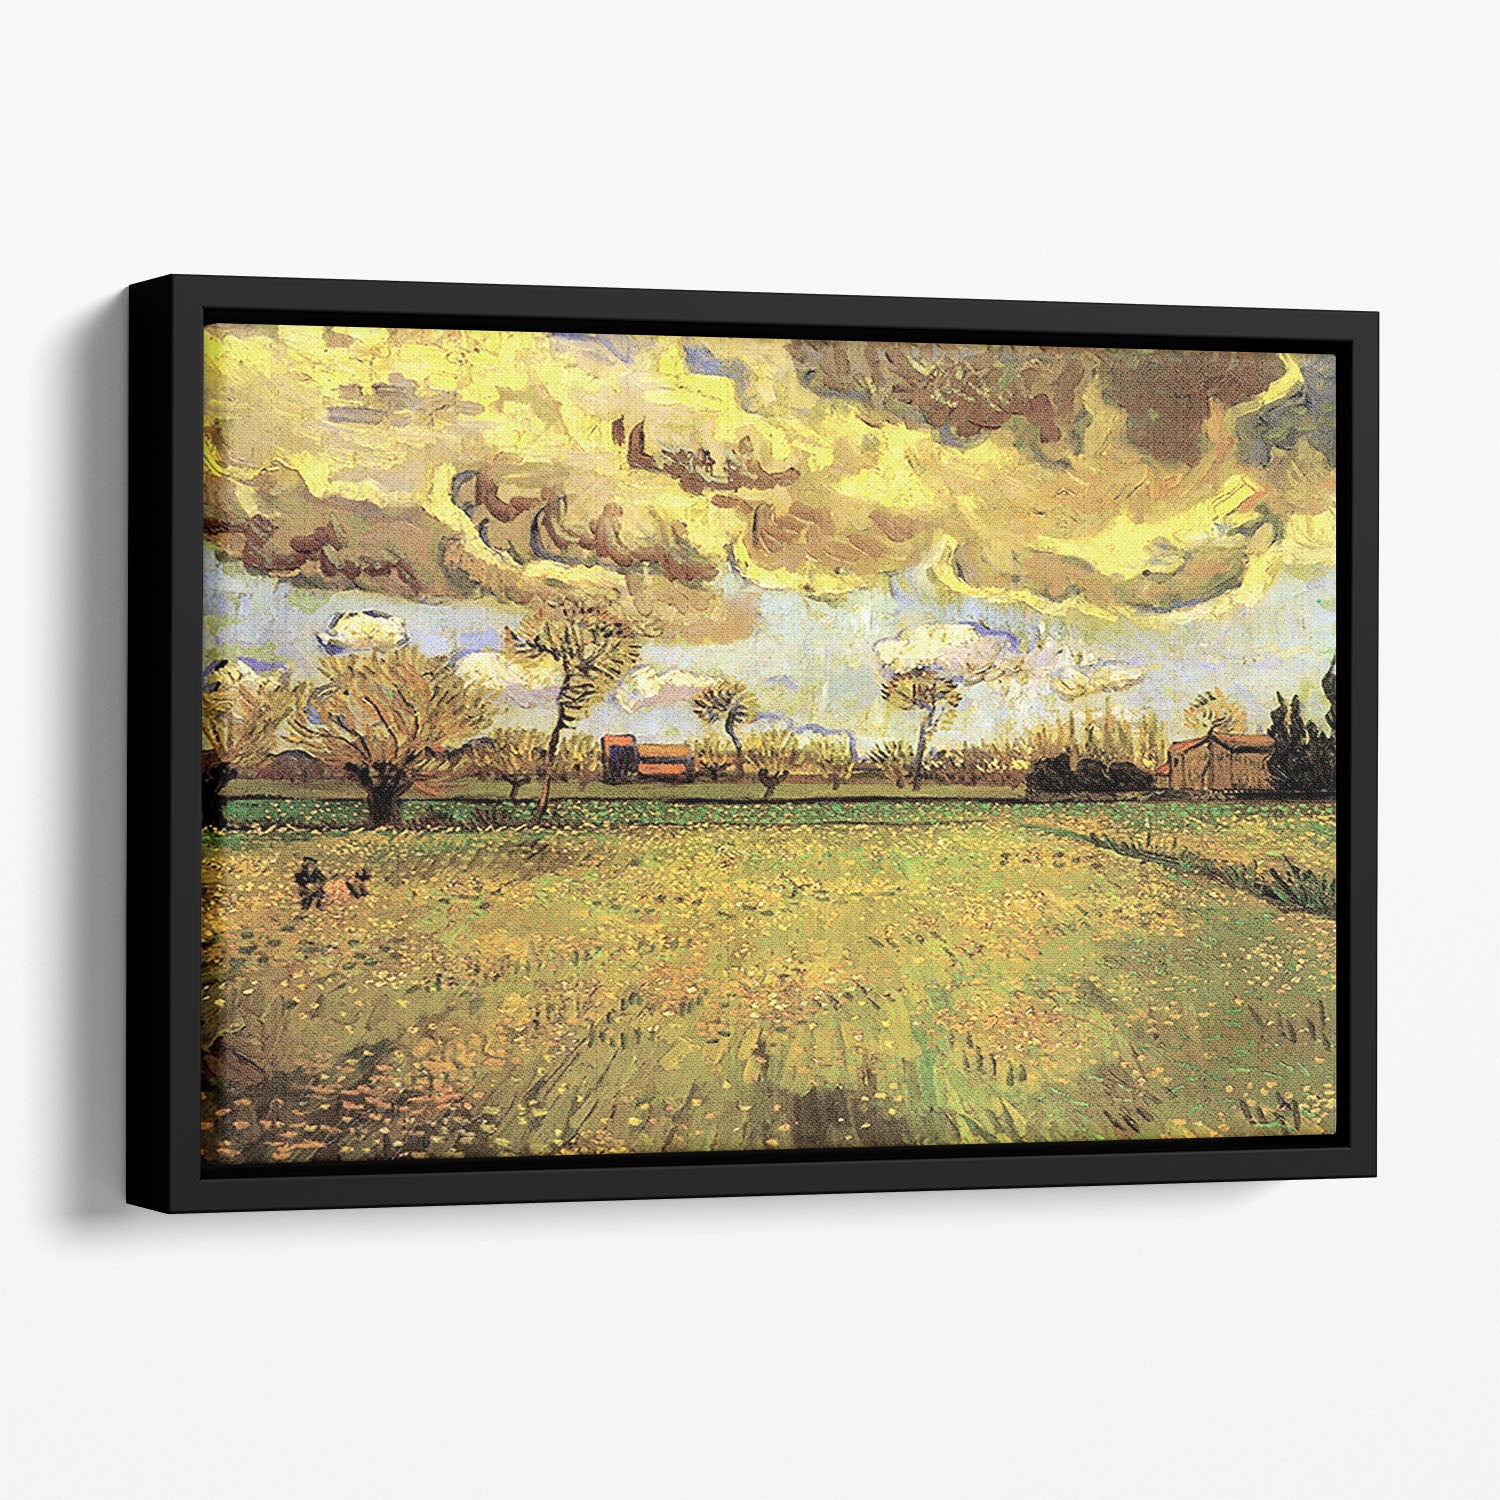 Landscape Under a Stormy Sky by Van Gogh Floating Framed Canvas